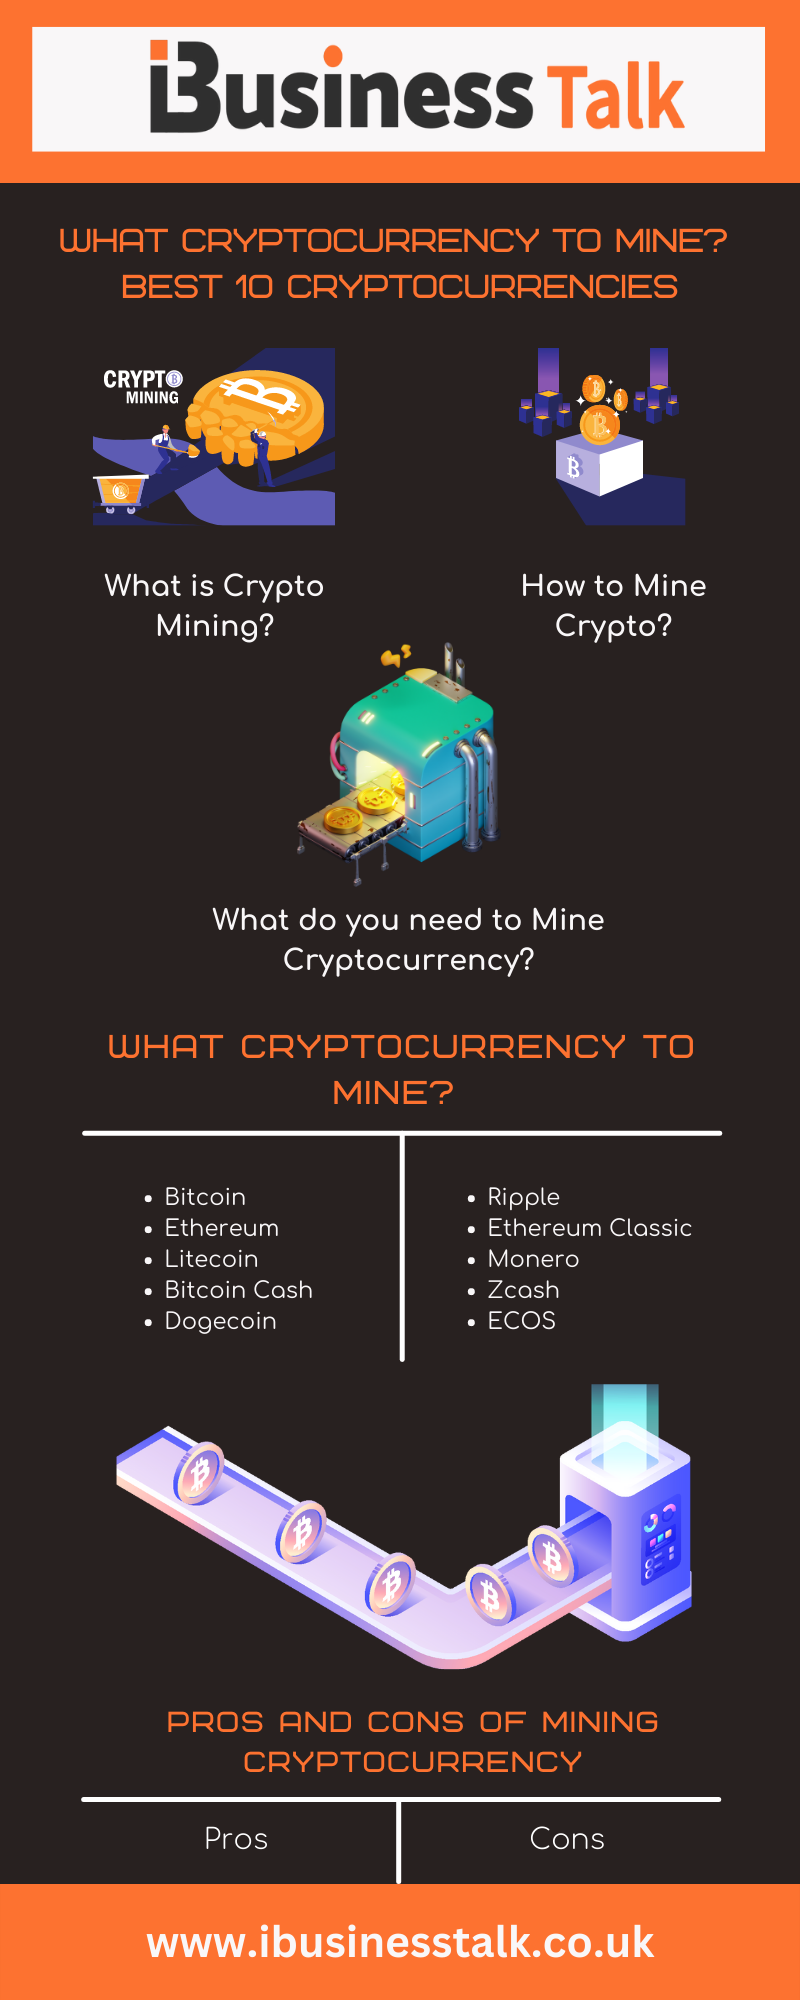 What Cryptocurrency to Mine